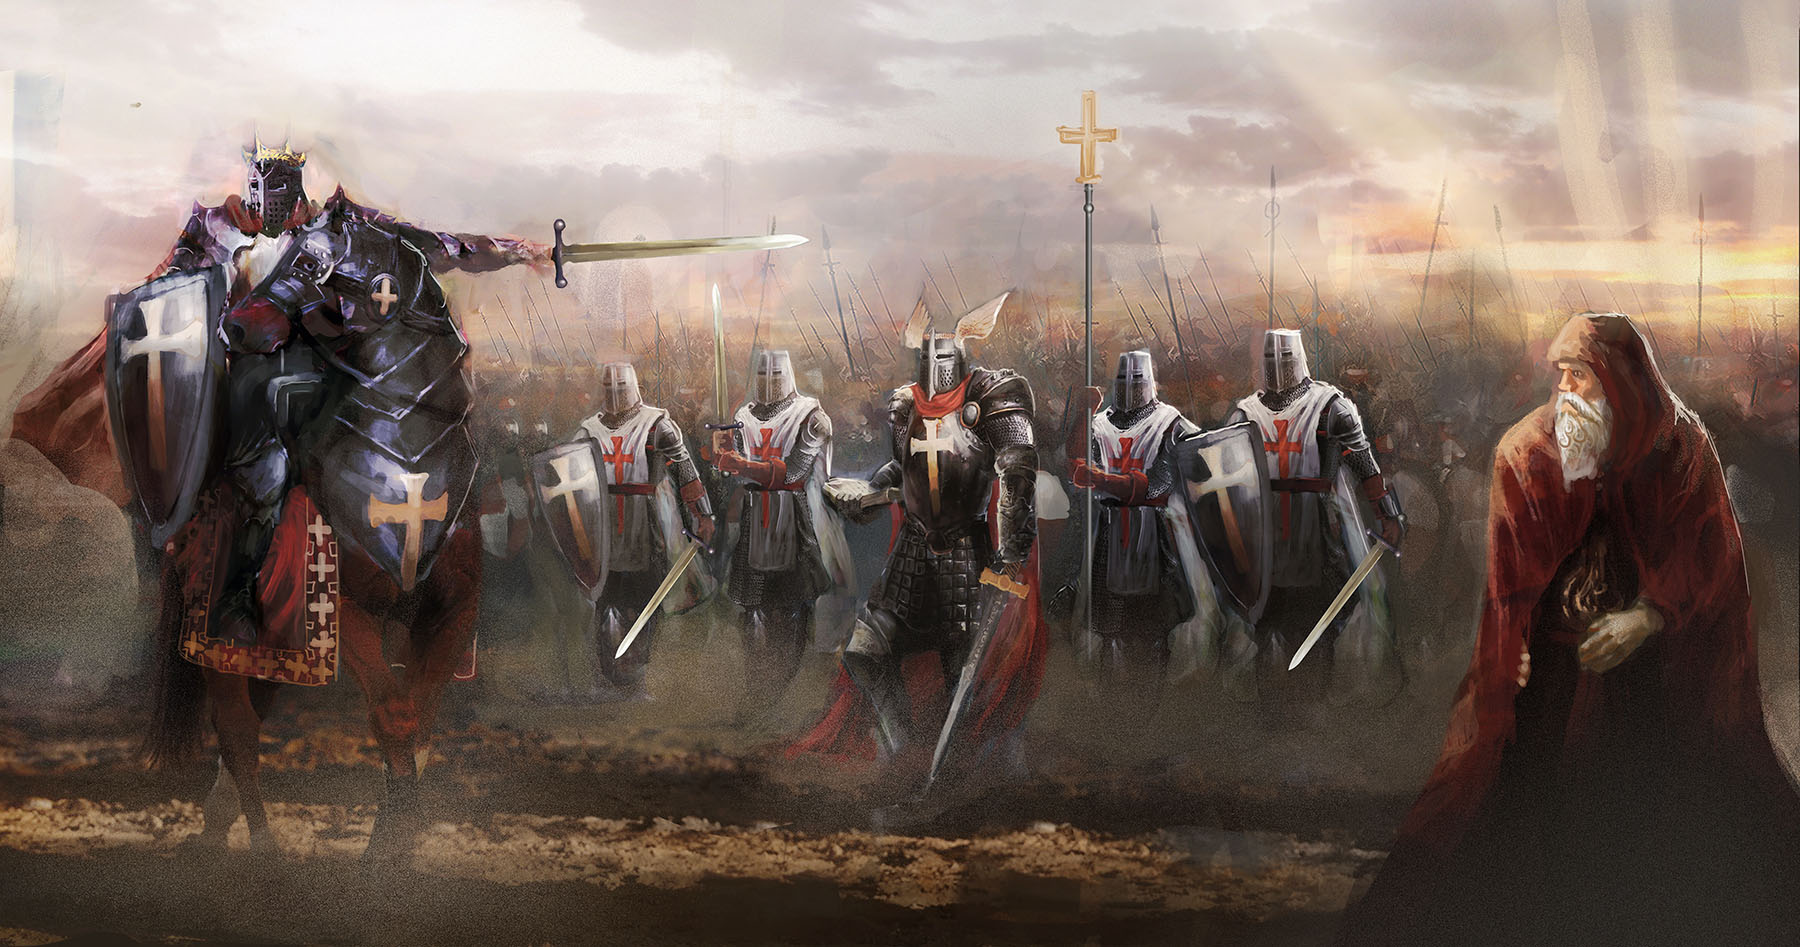 A history of the Crusades